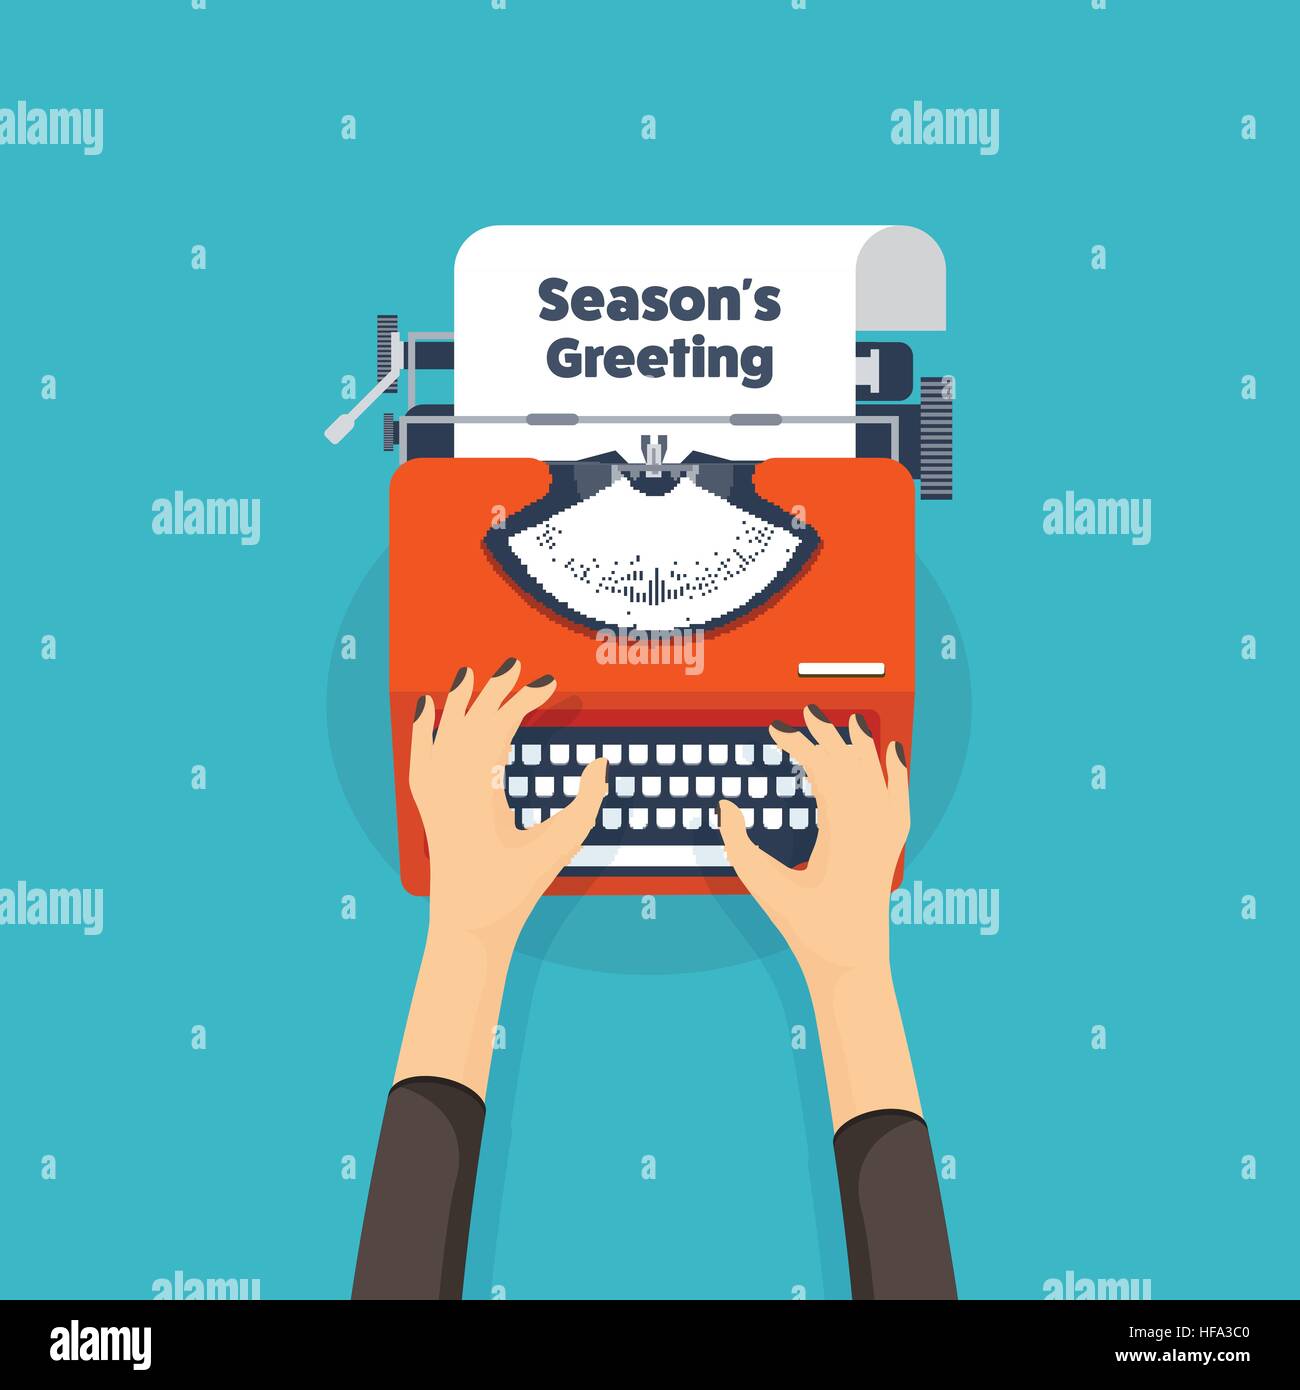 Typewriter in a flat style. Christmas wish list. Letter to Santa. New year. 2017. December holidays. Seasons greeting. Stock Vector